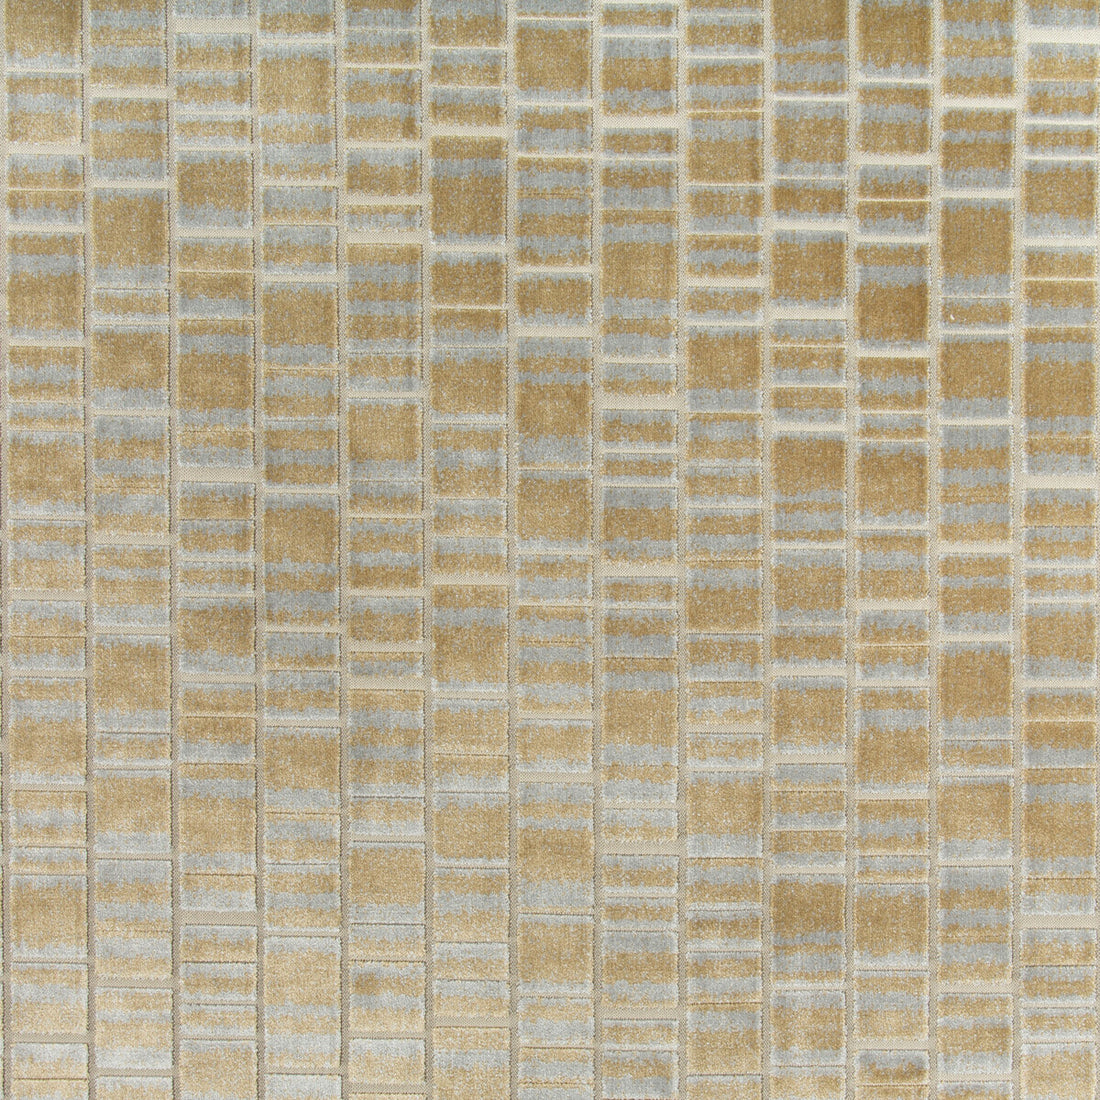 Caisson fabric in brass color - pattern 34847.411.0 - by Kravet Basics in the Thom Filicia Altitude collection